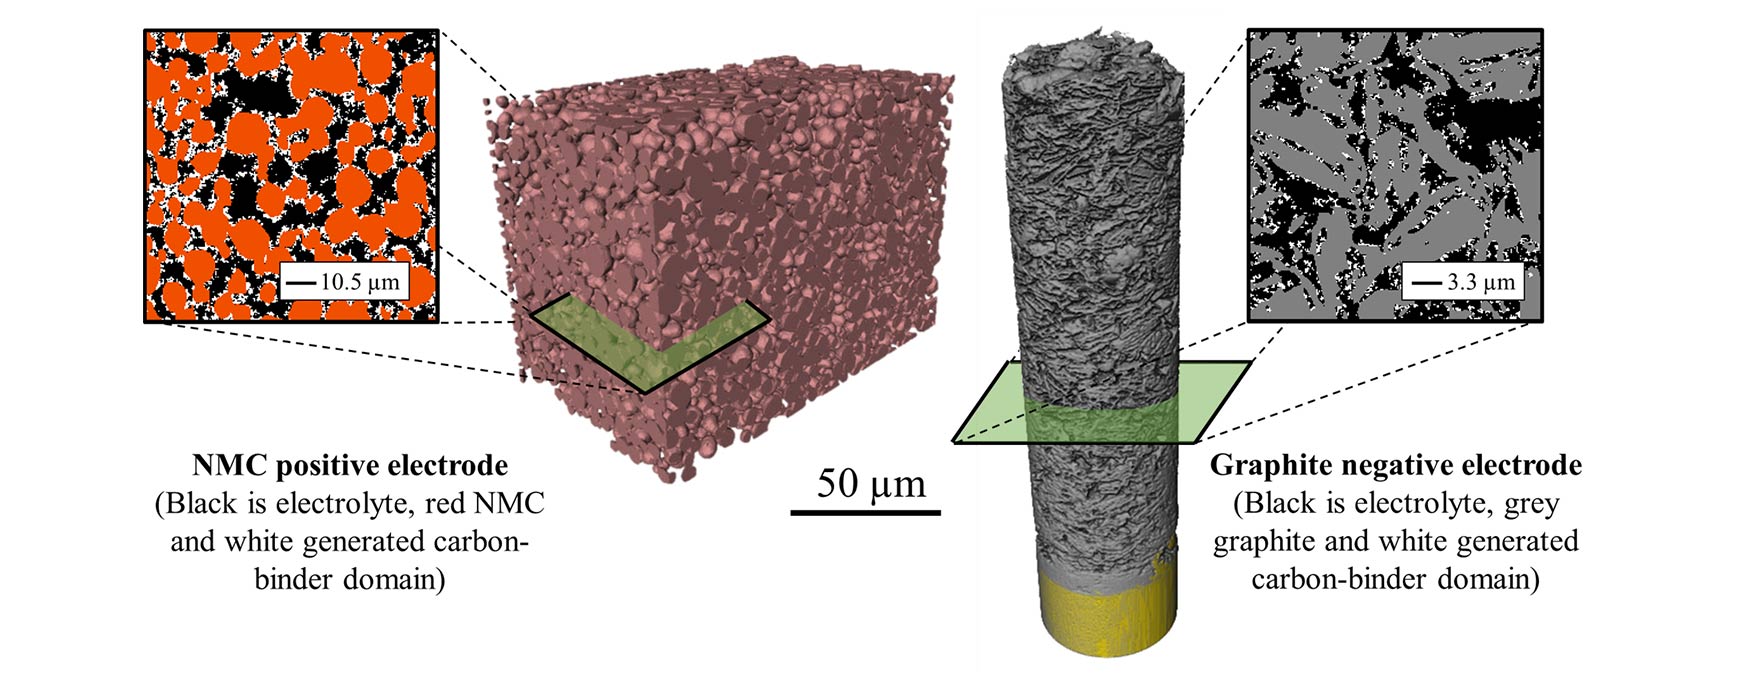 Three-dimensional volume of two electrode materials—a cube-shaped image and a cylindrical-shaped image-represented at the microstructure scale along with a two-dimensional slice view taken in the middle of each volume. The cube-shaped image is labeled 50 µm. Dashed lines connect it to a square image with red, black, and white splotches with a scale bar of 10.5 µm. A caption underneath both images says, "NMC positive electrode (Black is electrolyte, red NMC and white generated carbon-binder domain)." The cylindrical-shaped image is labeled 50 µm. Dashed lines connect it to a square image with black, grey, and white splotches with a scale bar of 3.3 µm. The caption underneath both images says, “Graphite negative electrode (Black is electrolyte, grey graphite and white generated carbon-binder domain).